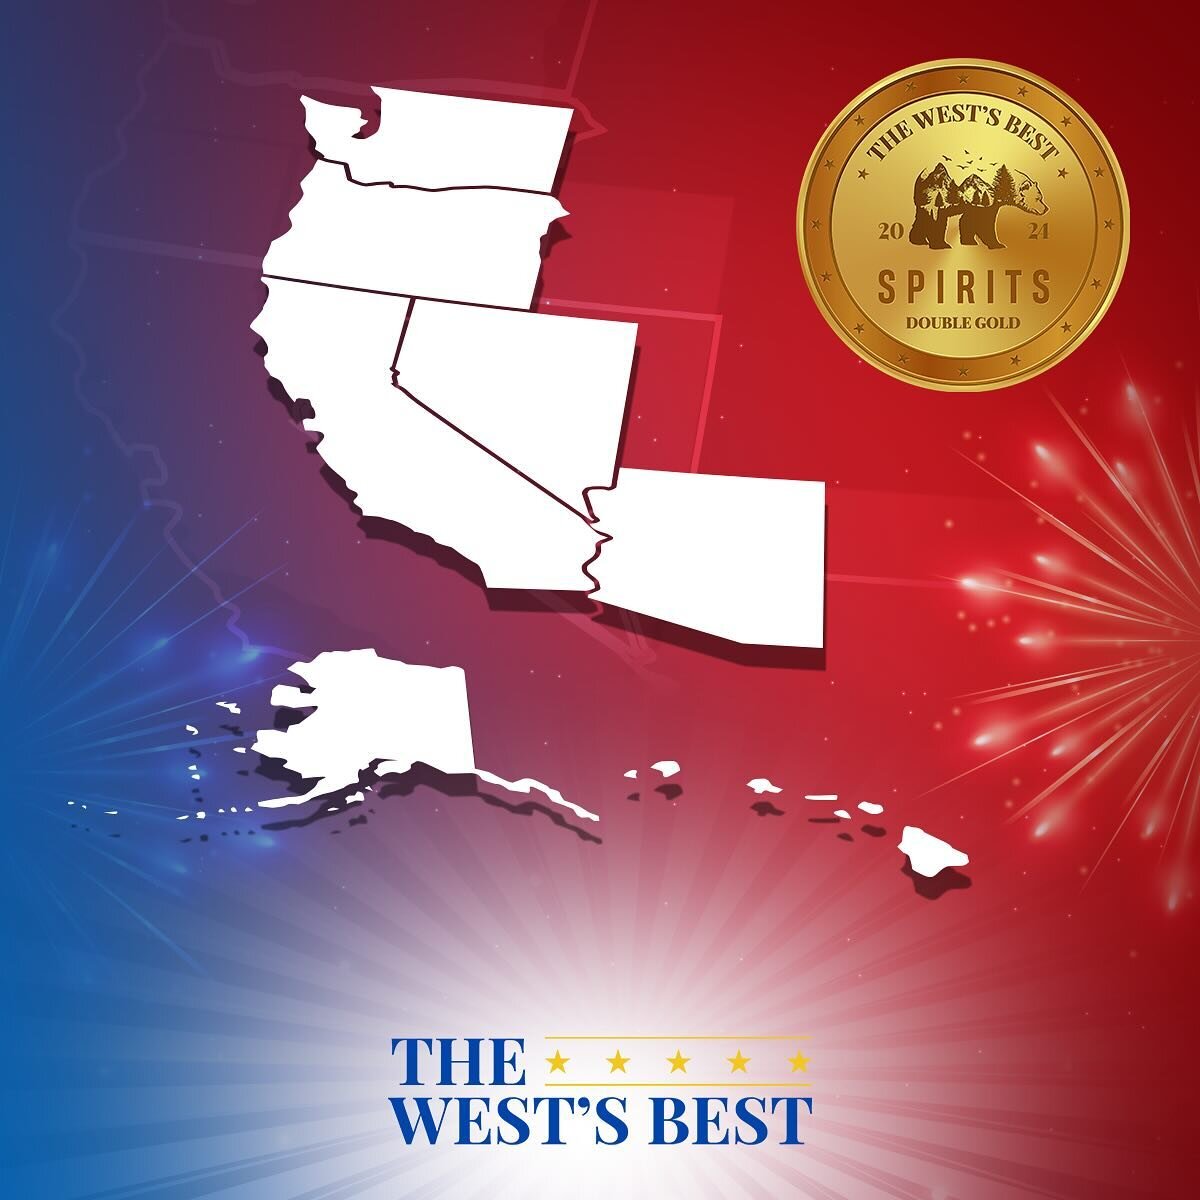 🌟🥃 Western Distillers, Shine at America&rsquo;s Best Spirits Awards! 🌅🏆

Dive into a unique opportunity where your spirits can triumph at state, regional (The West&rsquo;s Best), and national levels&mdash;all with one entry! Whether you&rsquo;re 